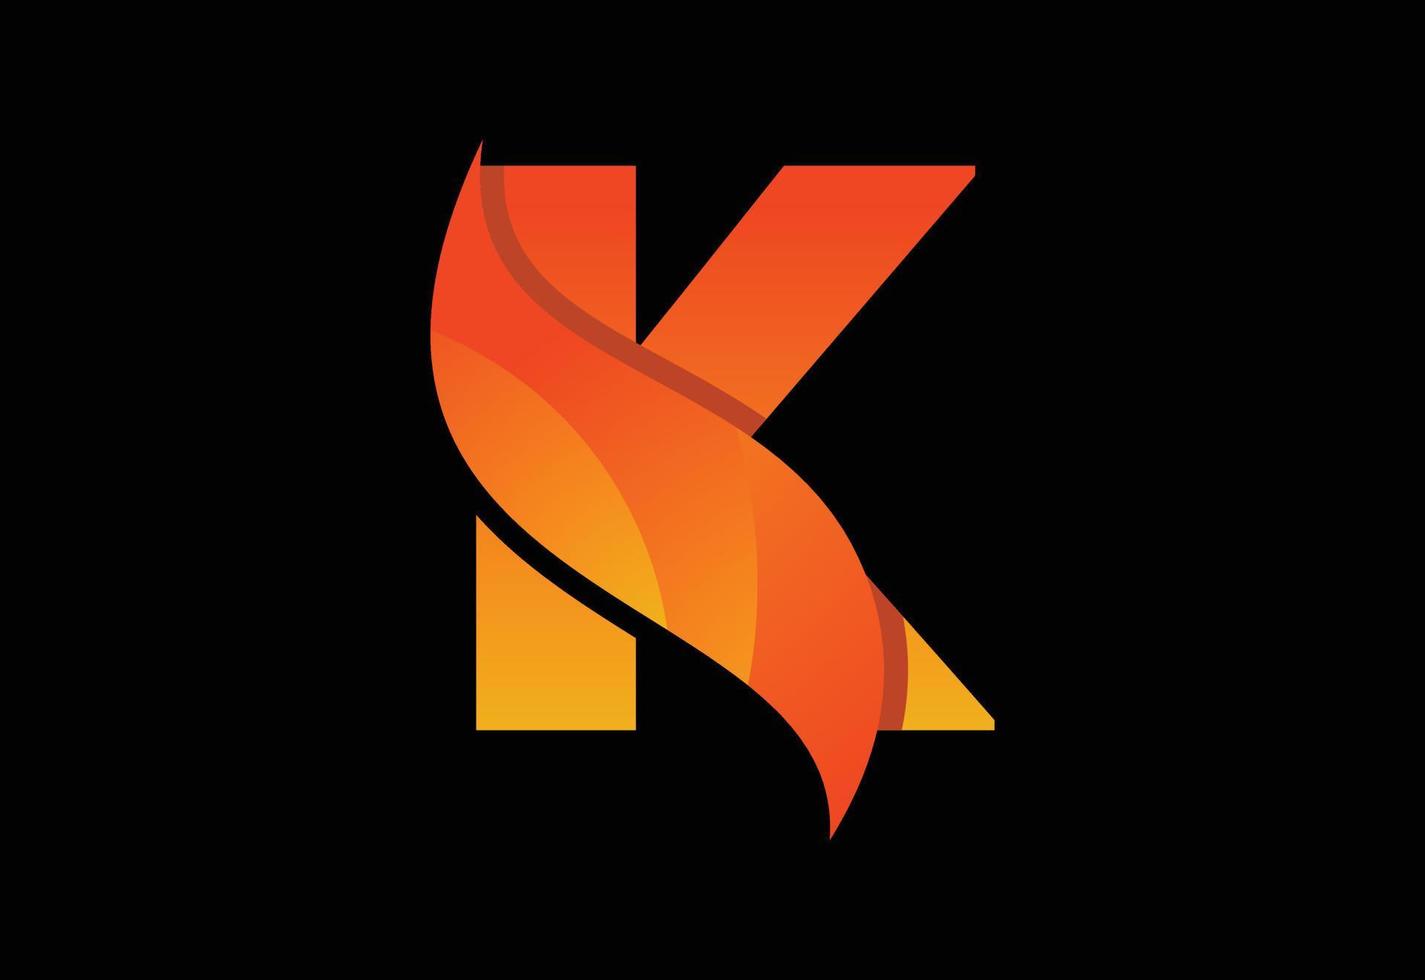 Initial K monogram letter with a swoosh or flame. Fire flames or swoosh design vector illustration